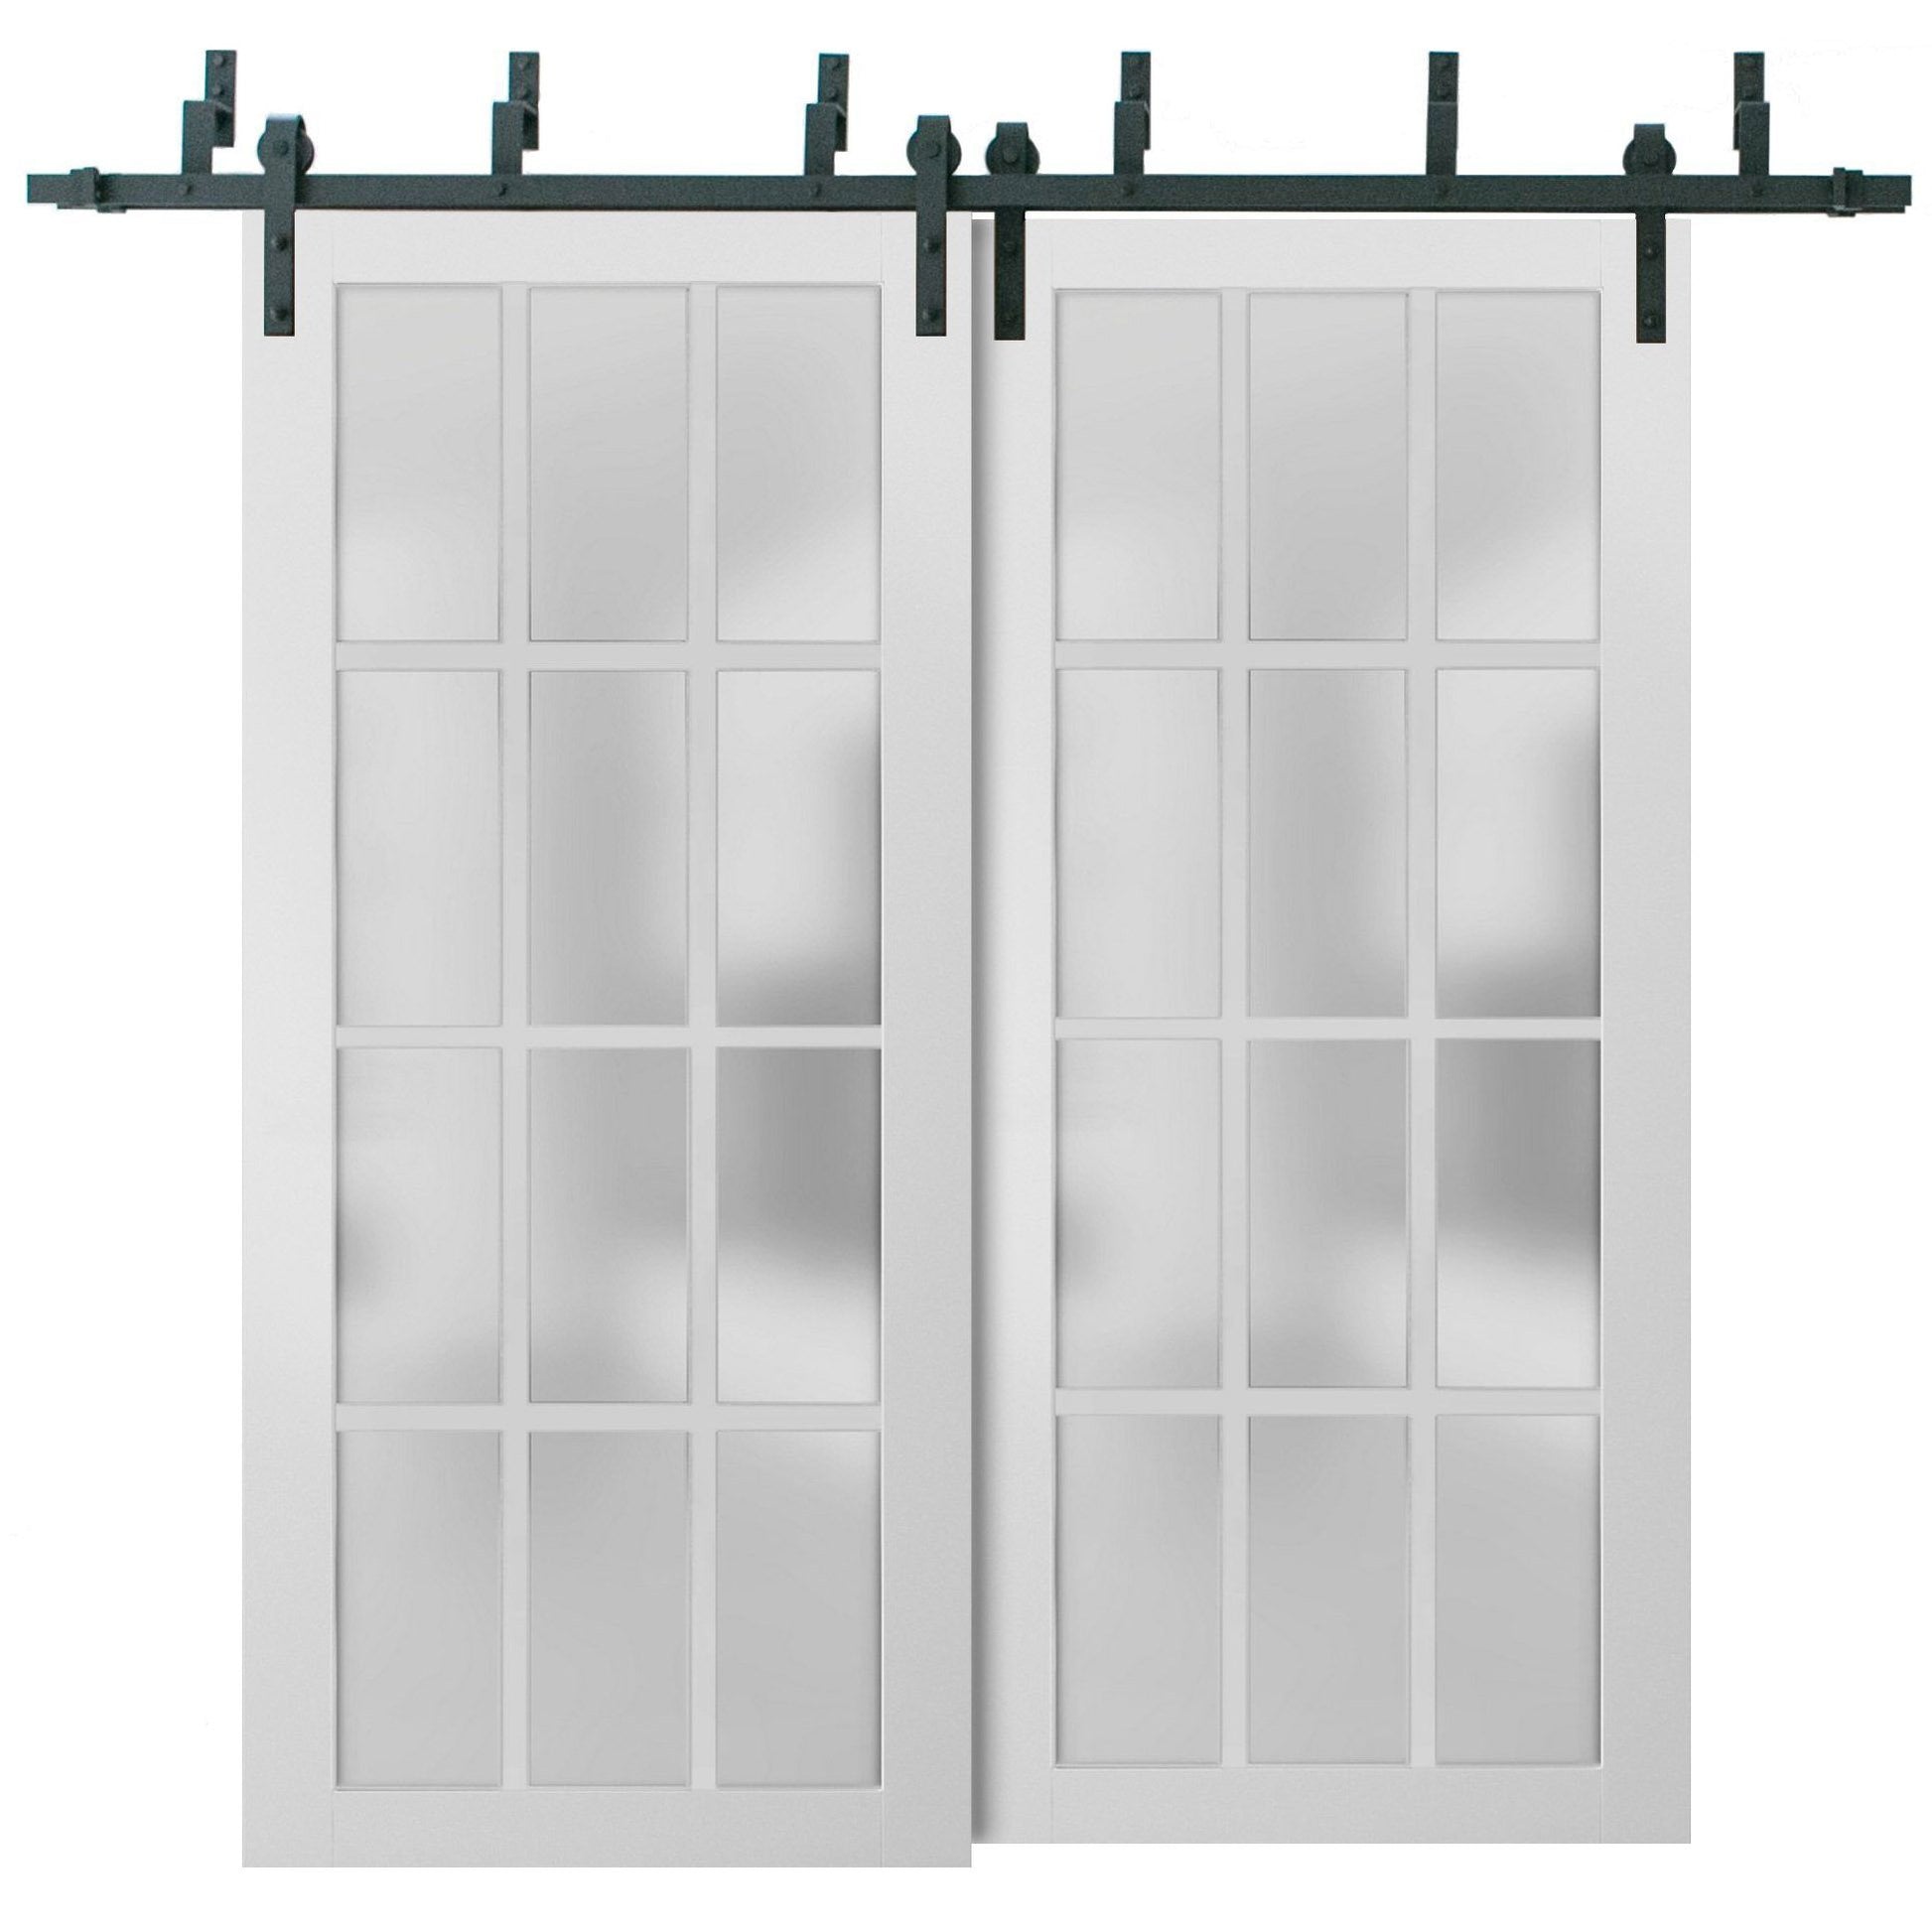 Felicia 3312 Matte White Double Barn Door with 12 Lites Frosted Glass | Black Bypass Rails